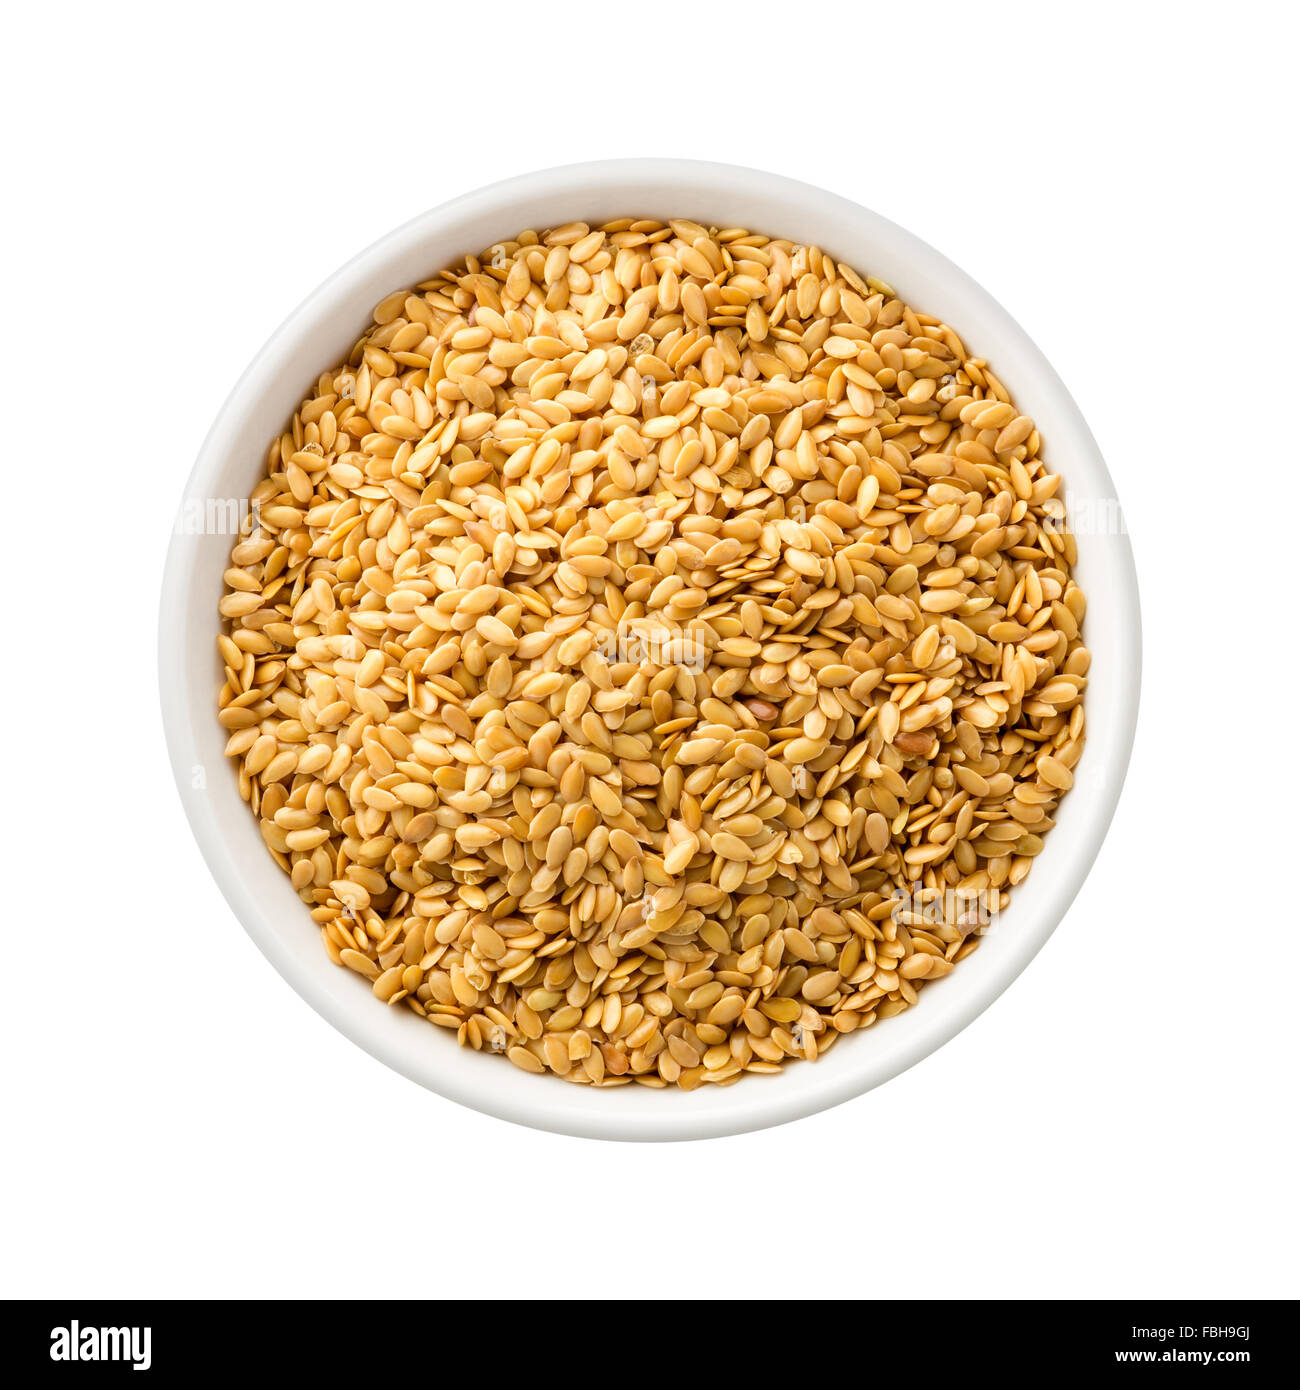 Golden Flax Seed in a Ceramic Bowl Stock Photo